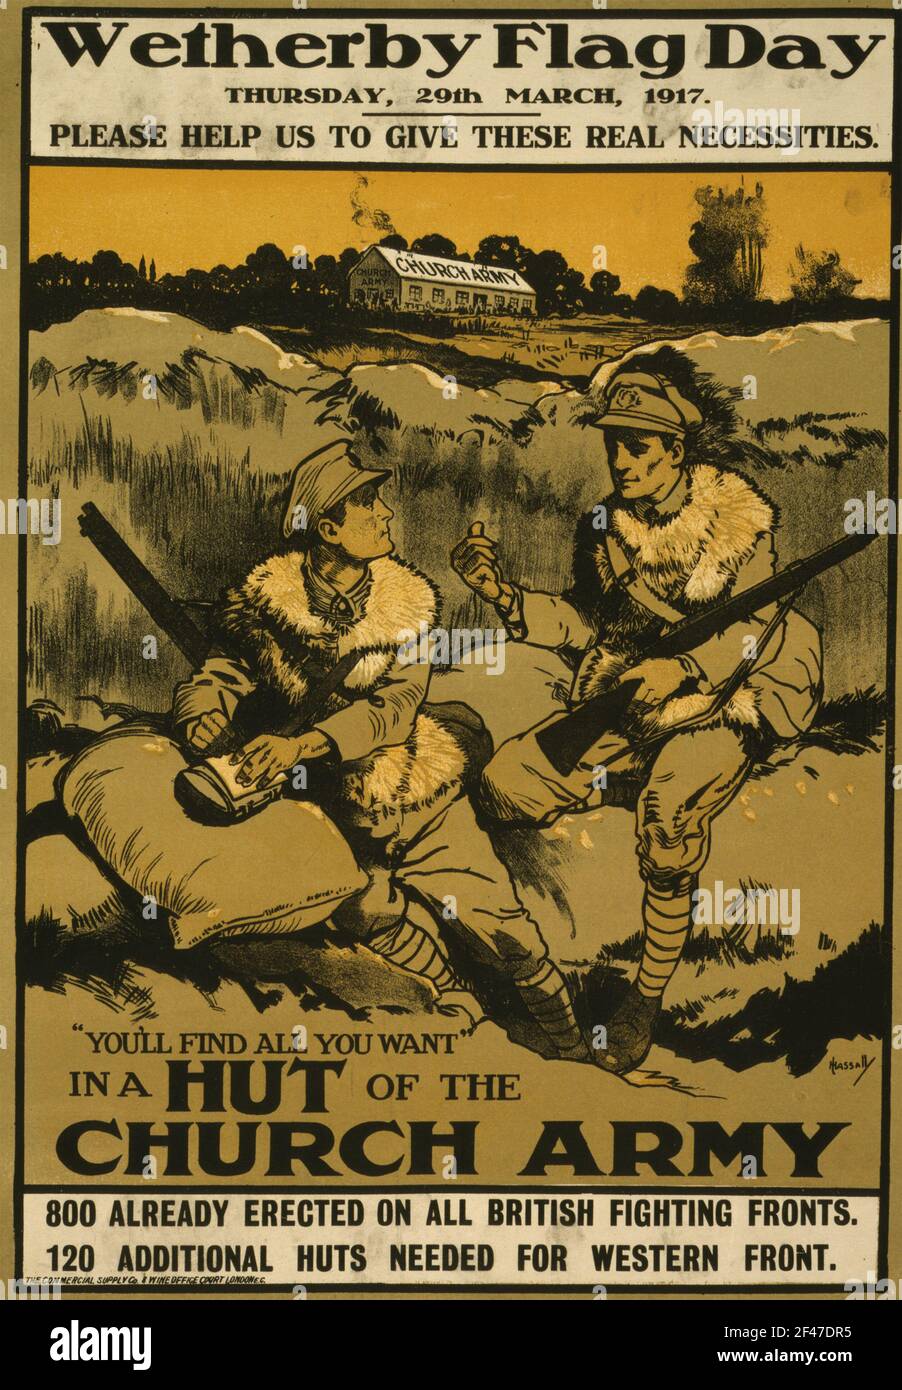 A first world war poster for the Wetherby Flag Day for Huts of the Church Army Stock Photo